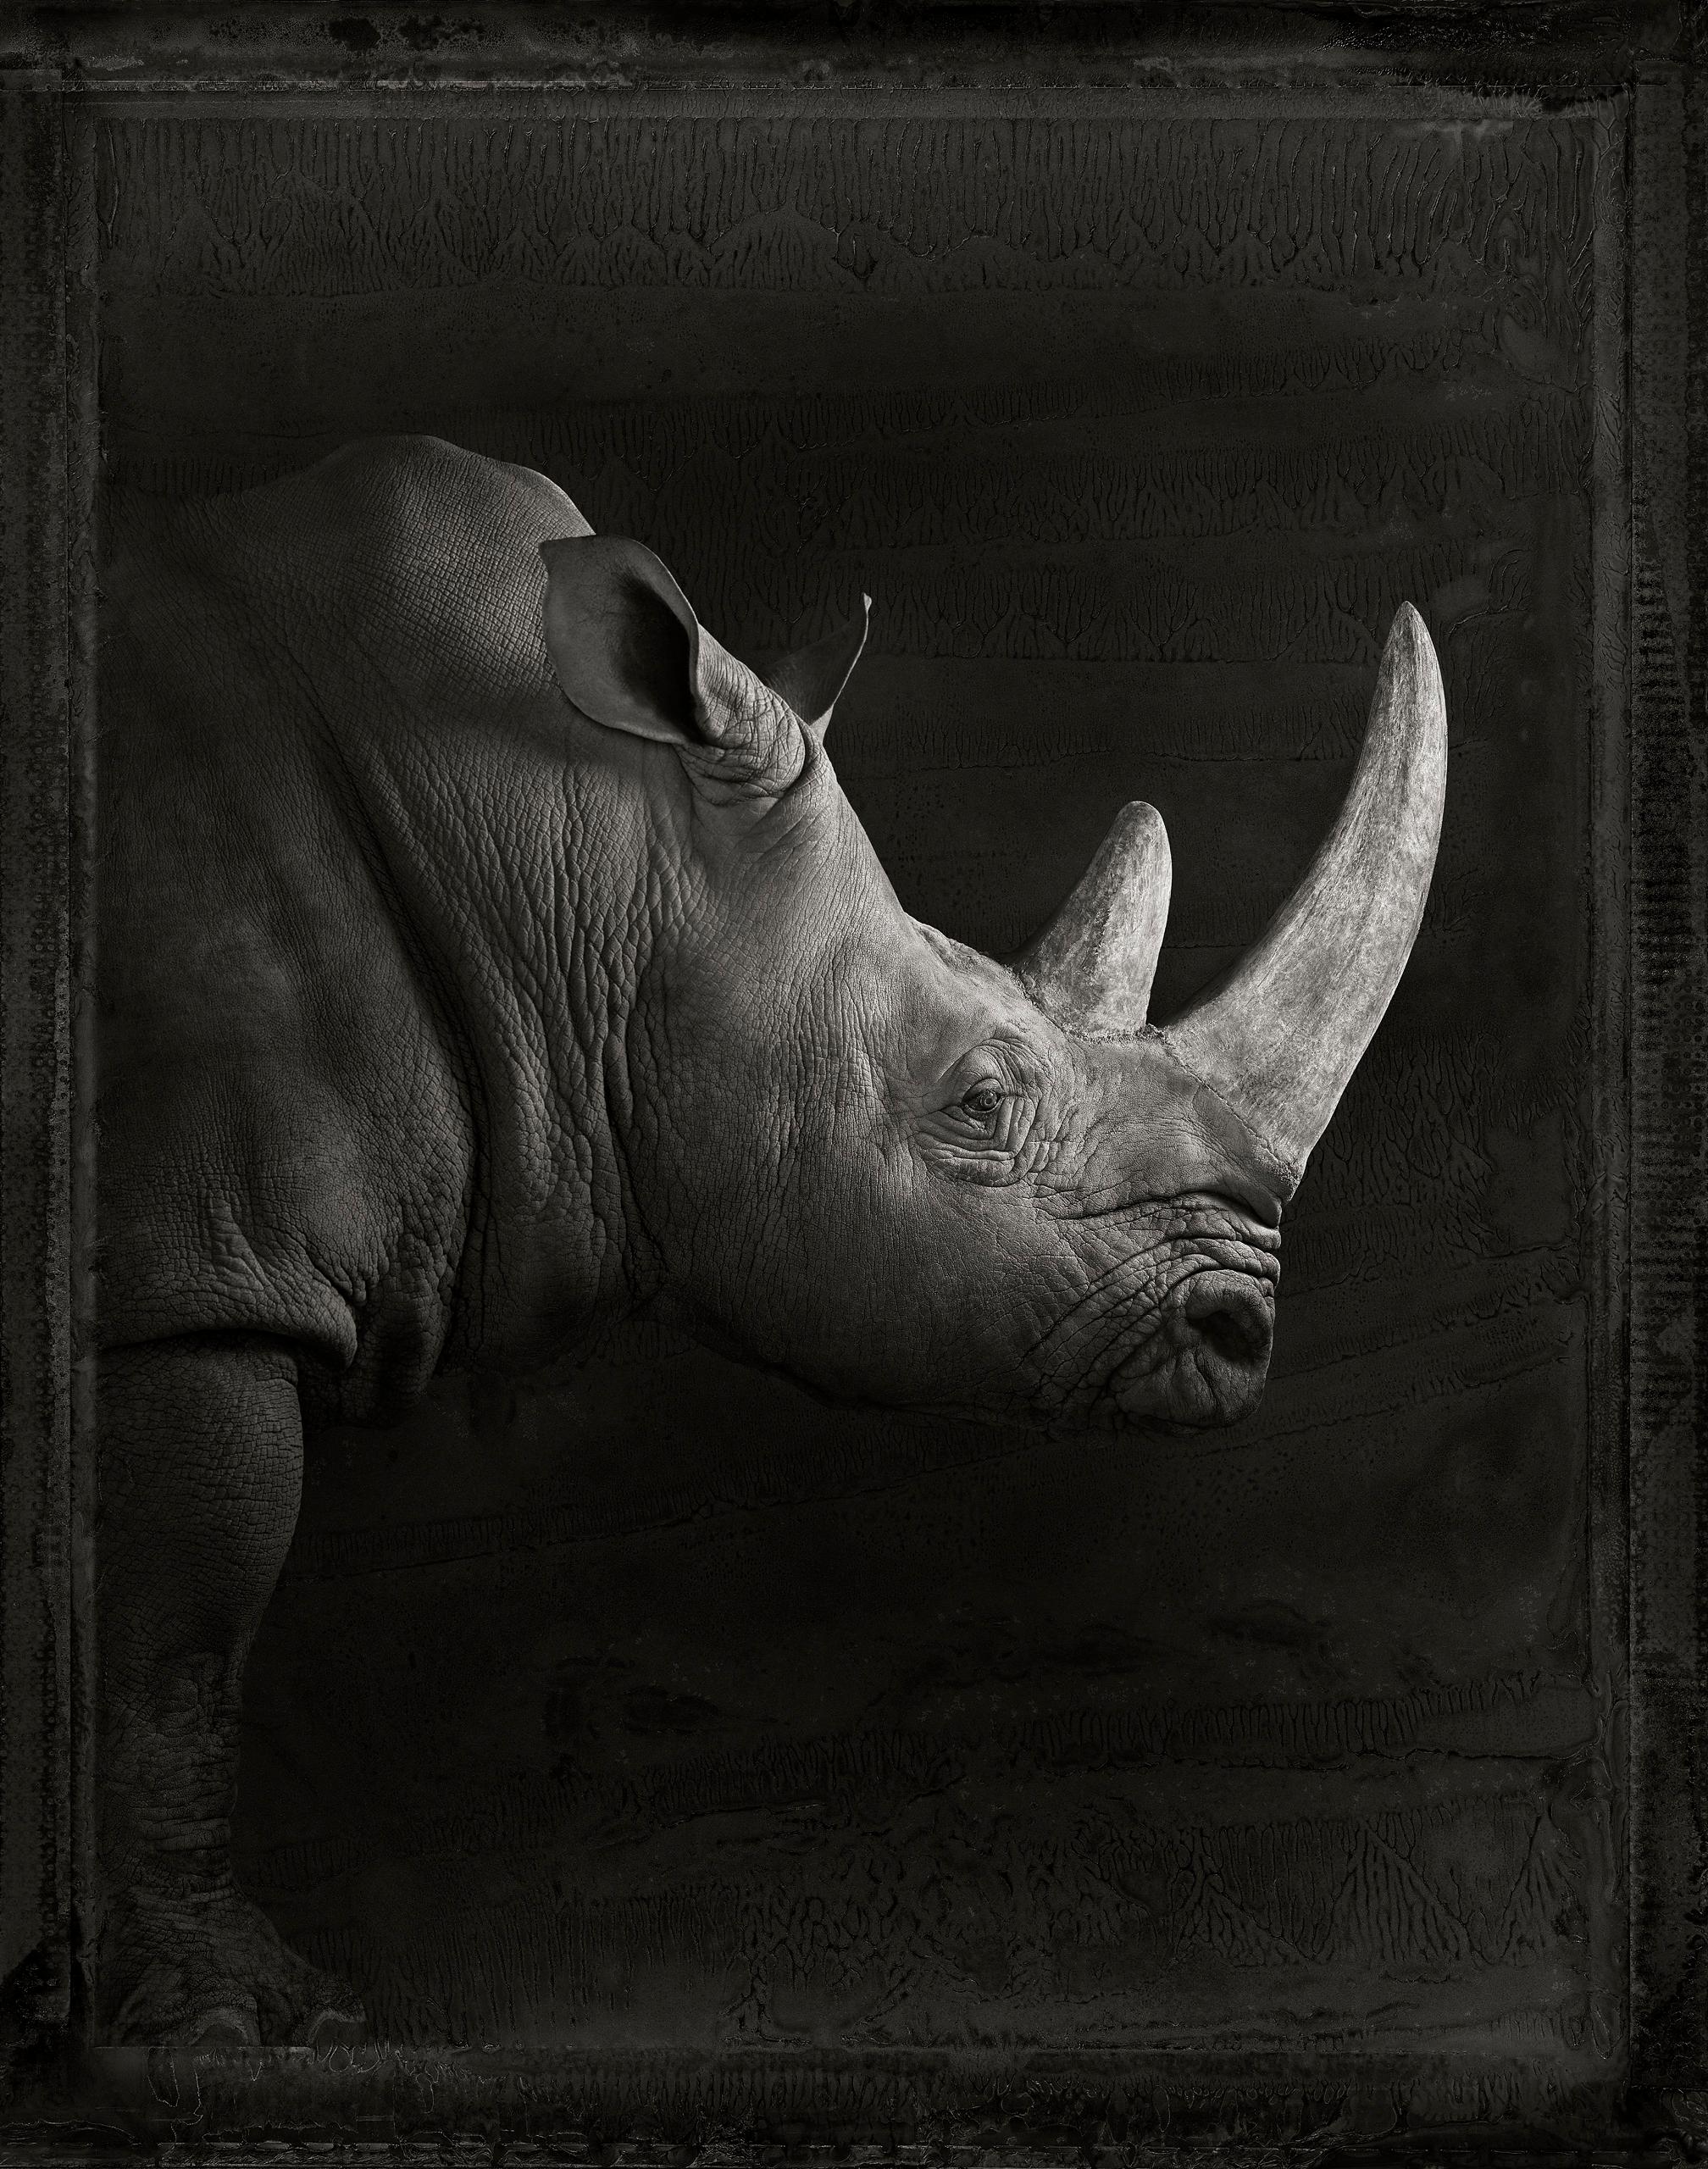 "Rhinoceros" is a signed photograph

For millions of years, early humans evolved alongside all other wildlife in a completely analog world, sharing the same natural environments in very similar ways. Although our paths diverged markedly around